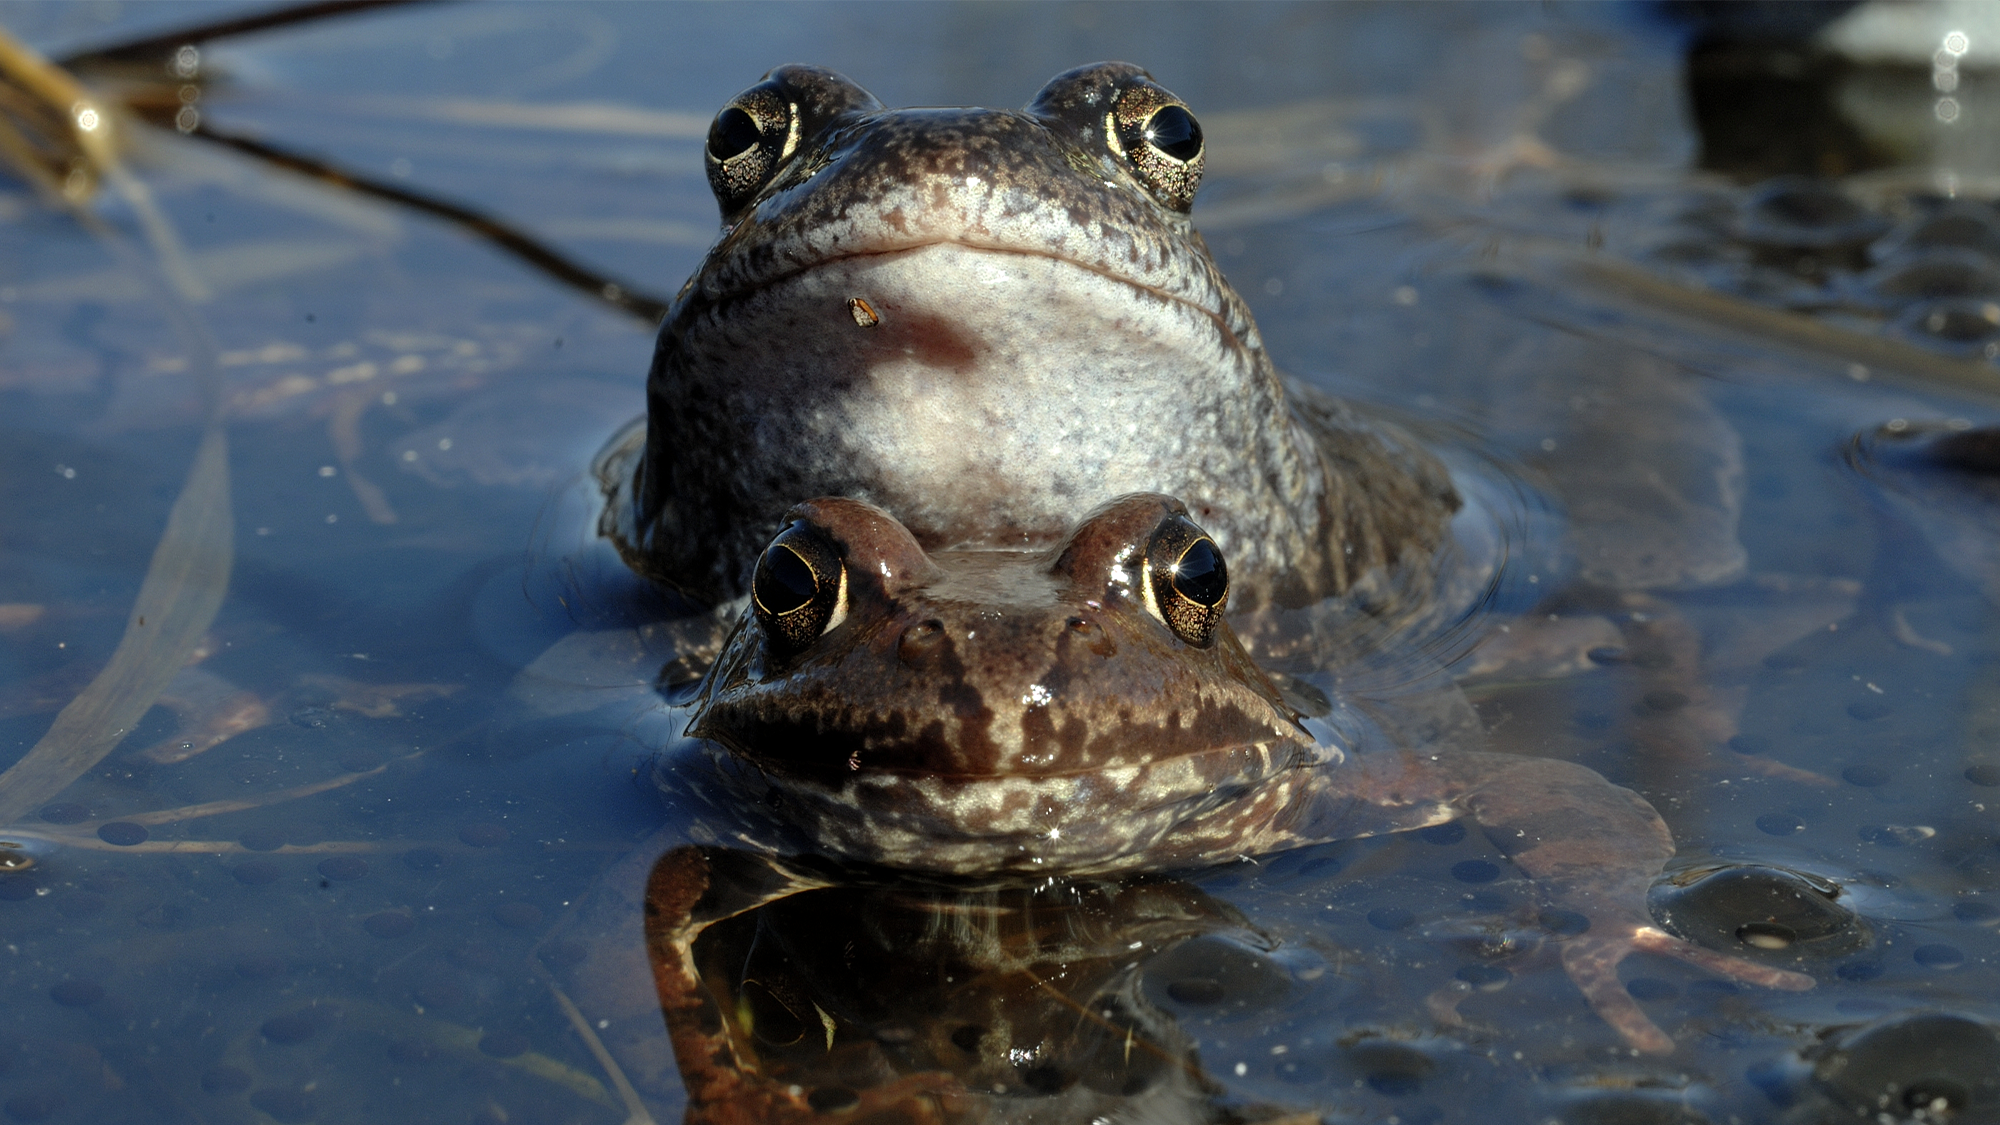 Female frogs appear to play dead to avoid mating